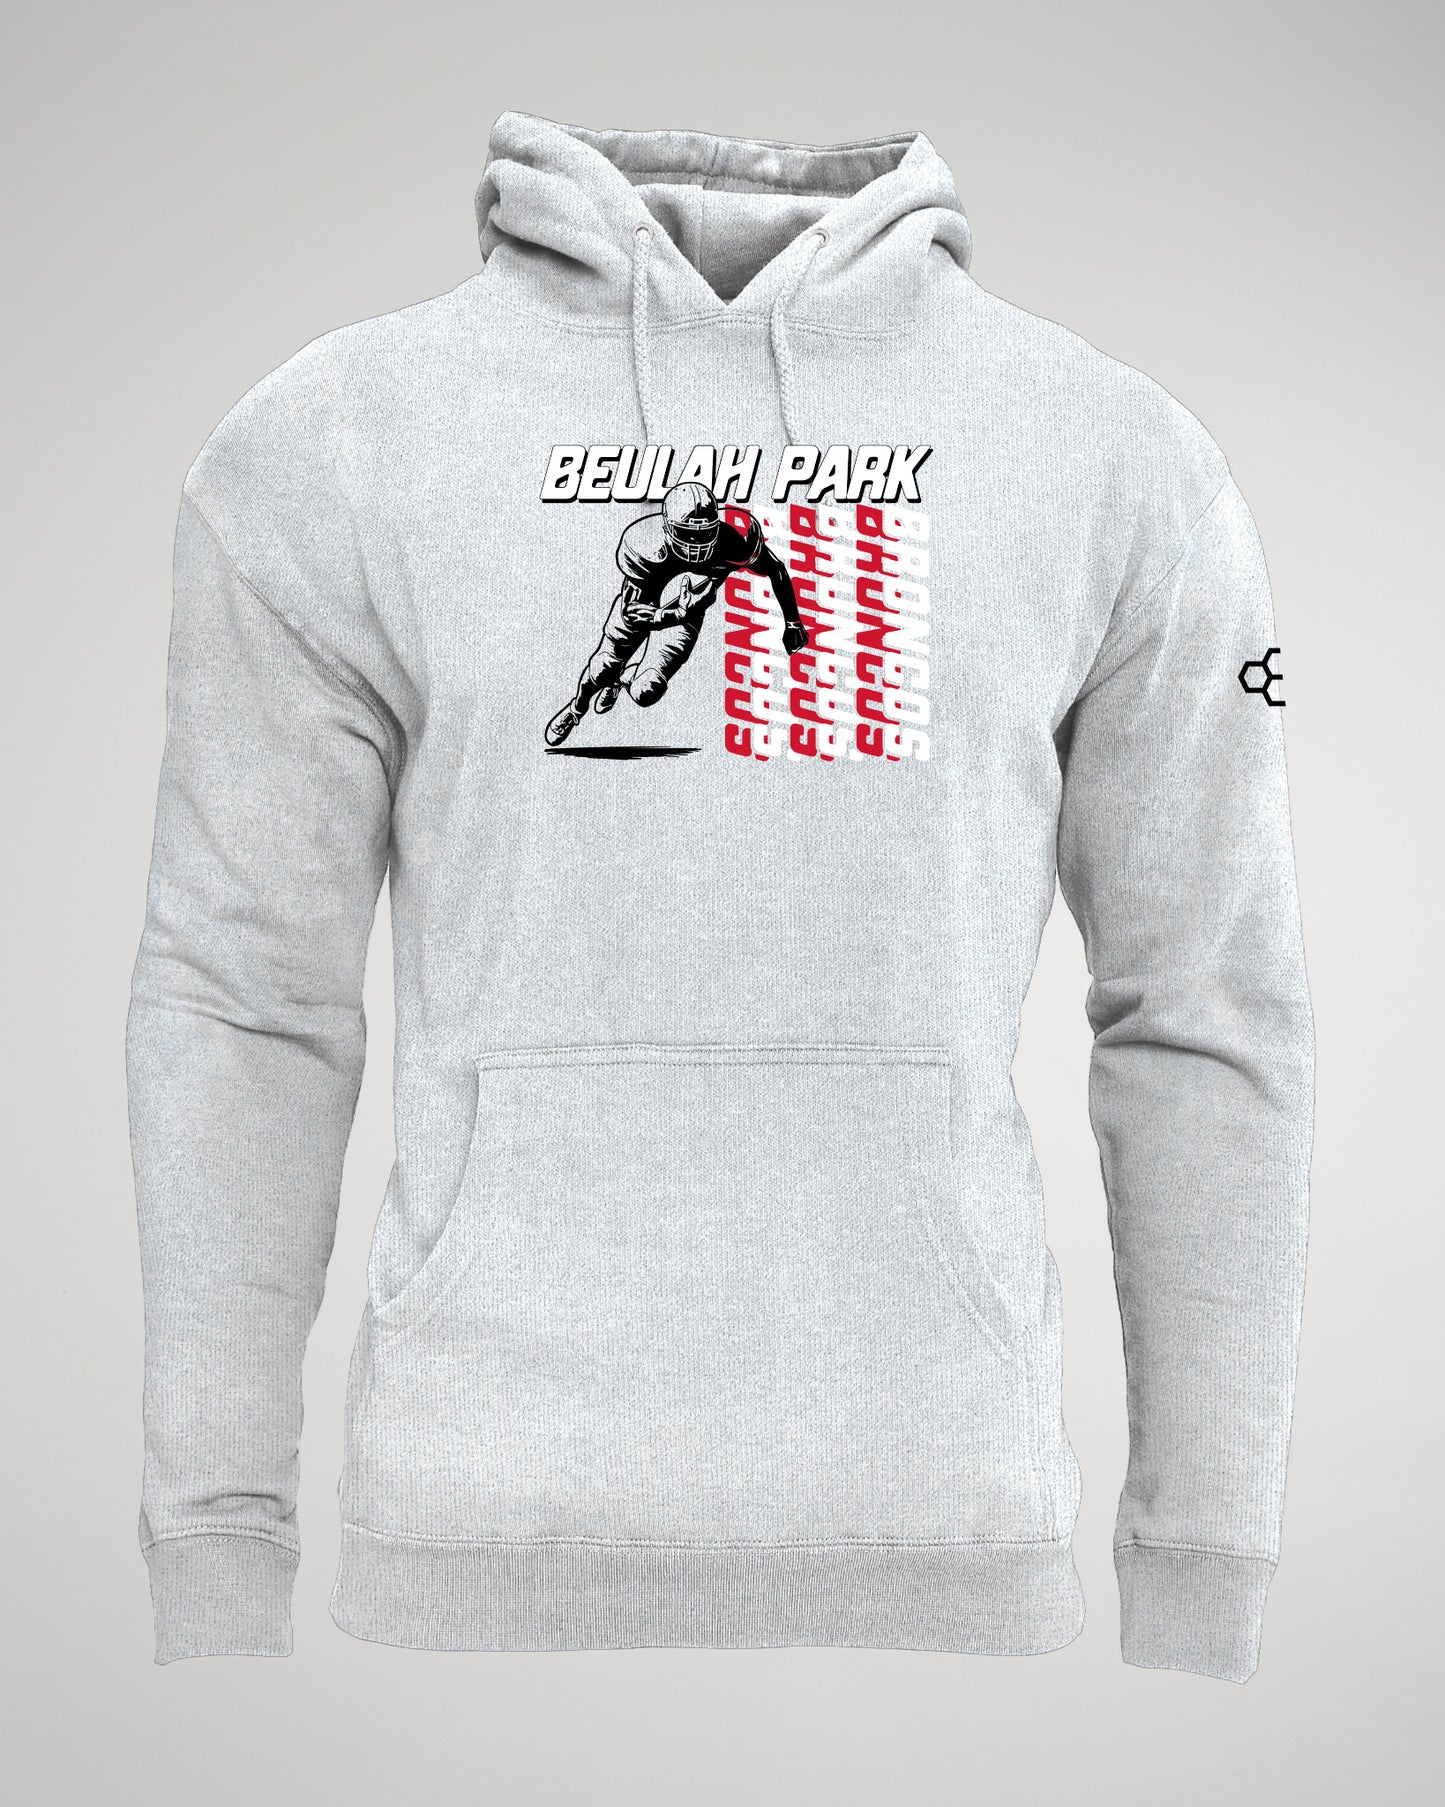 Tradition Hoodie-Unisex--Beulah Park Football